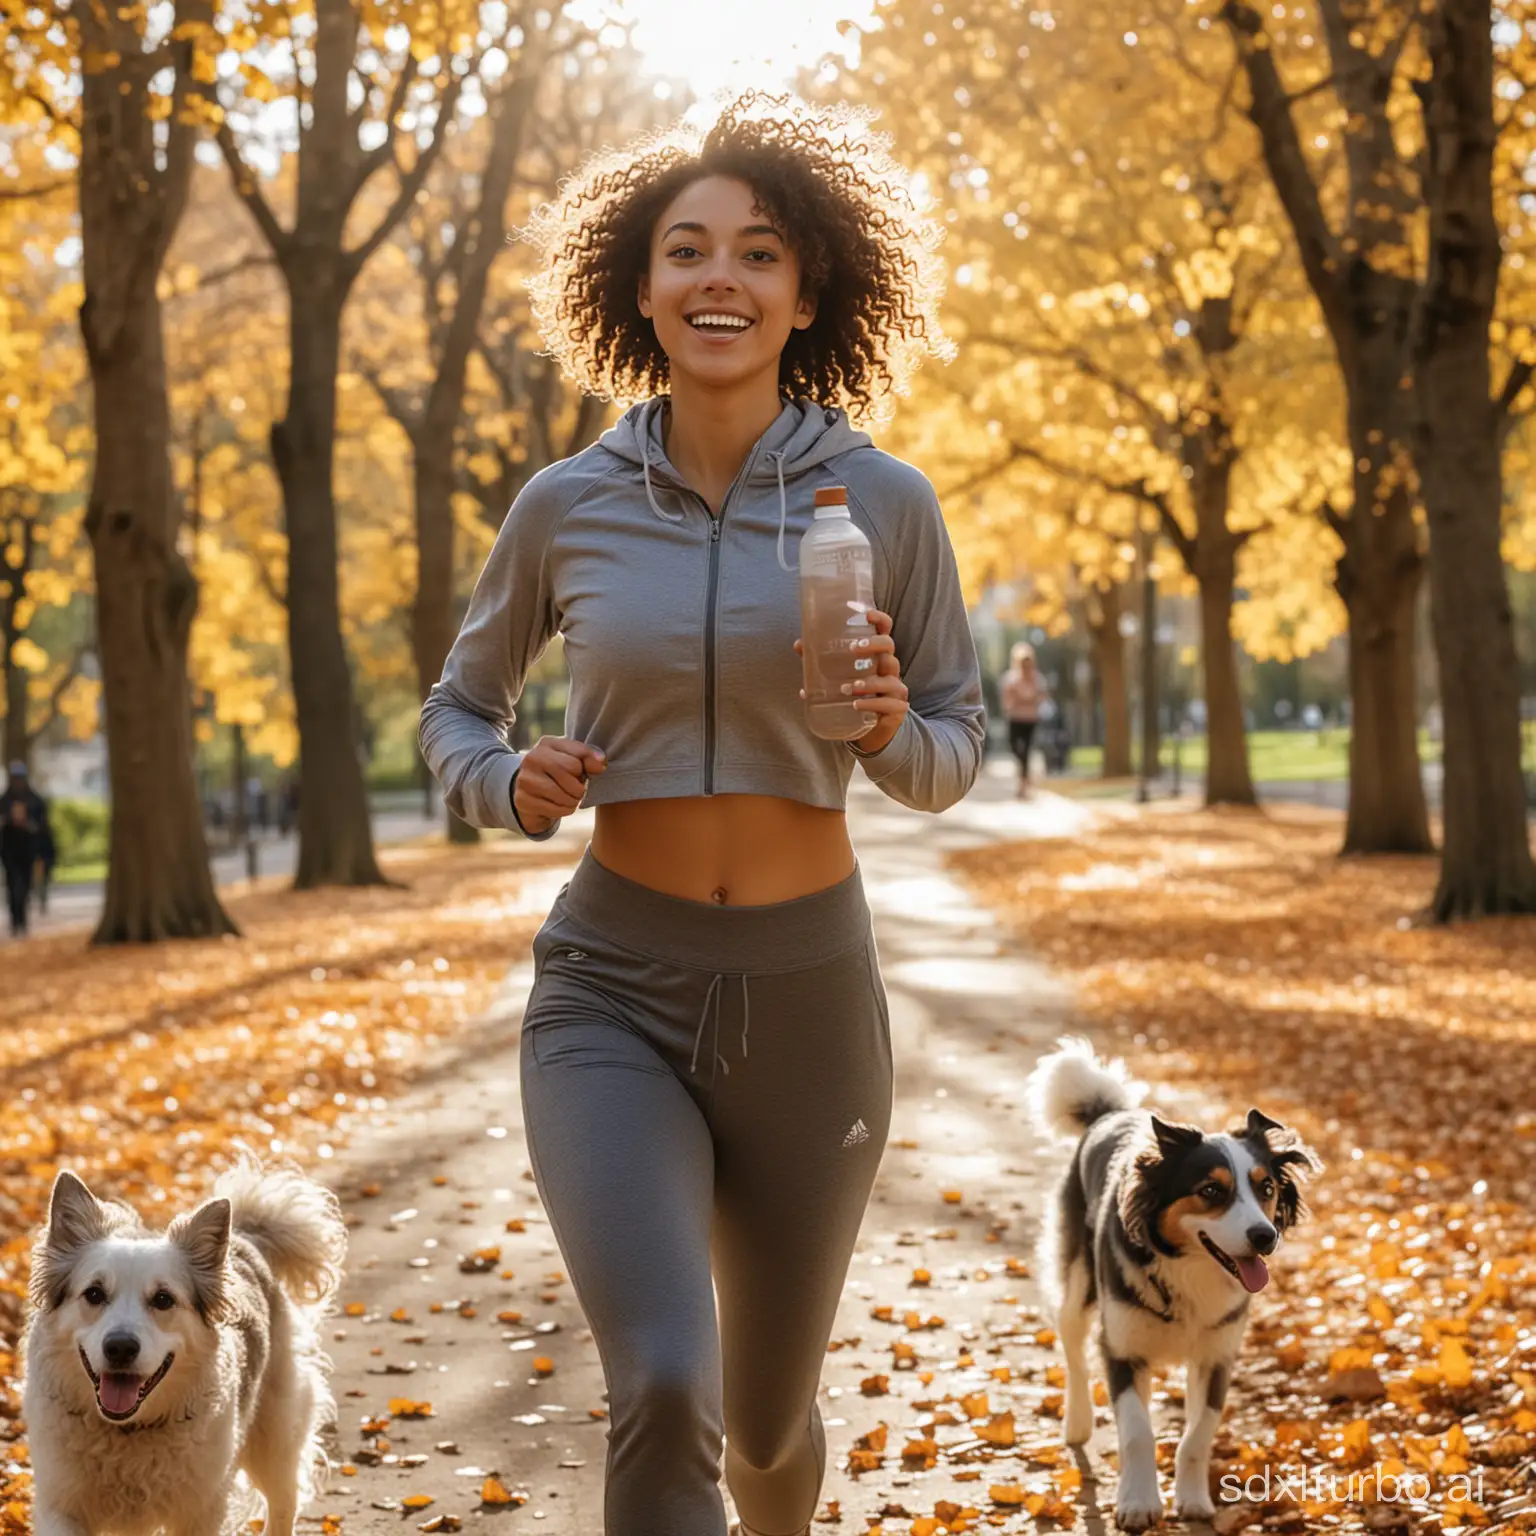 A curly haired girl with an athletic body in sportwear running in a park with a dog , have an encouraging expression with sunlight added to the scene holding a water bottle in her hand , with fallen leaves on the ground and other joggers in the background